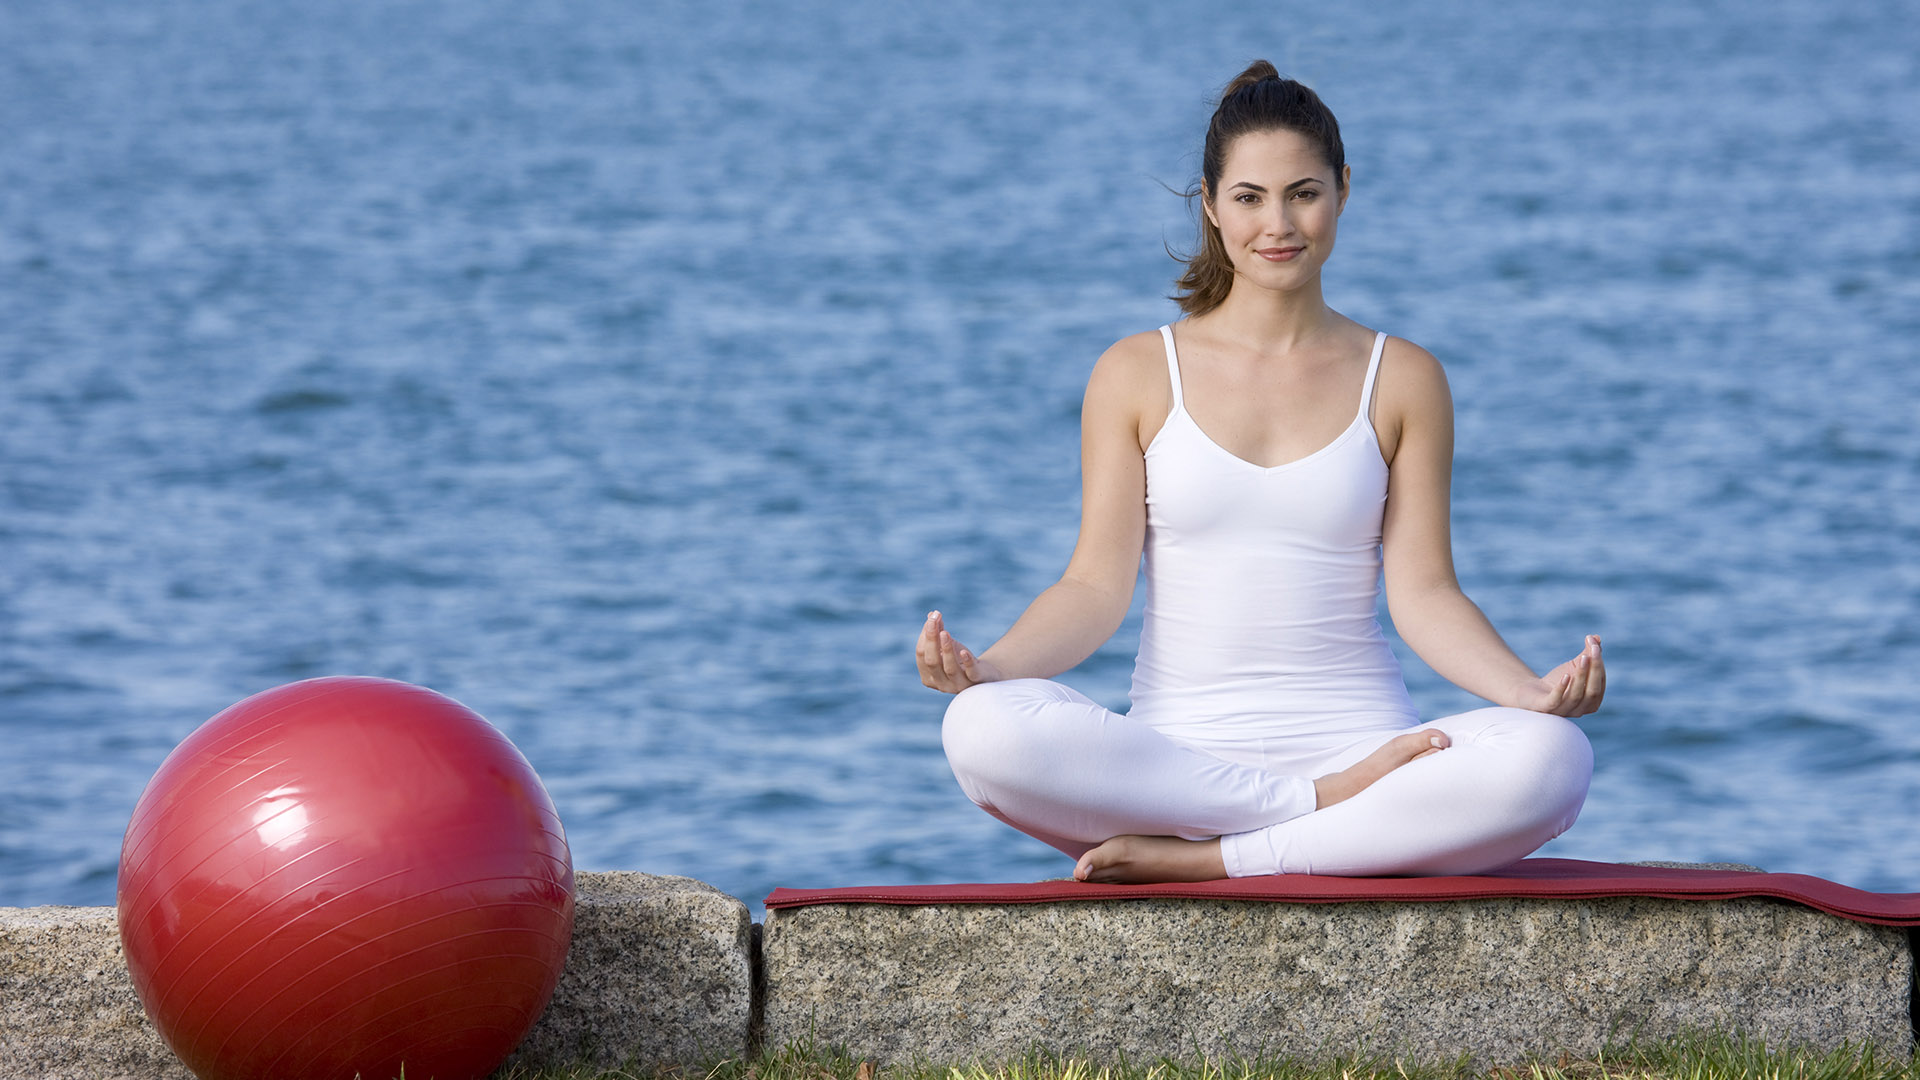 twenty two liberty girl in yoga pose with red ball